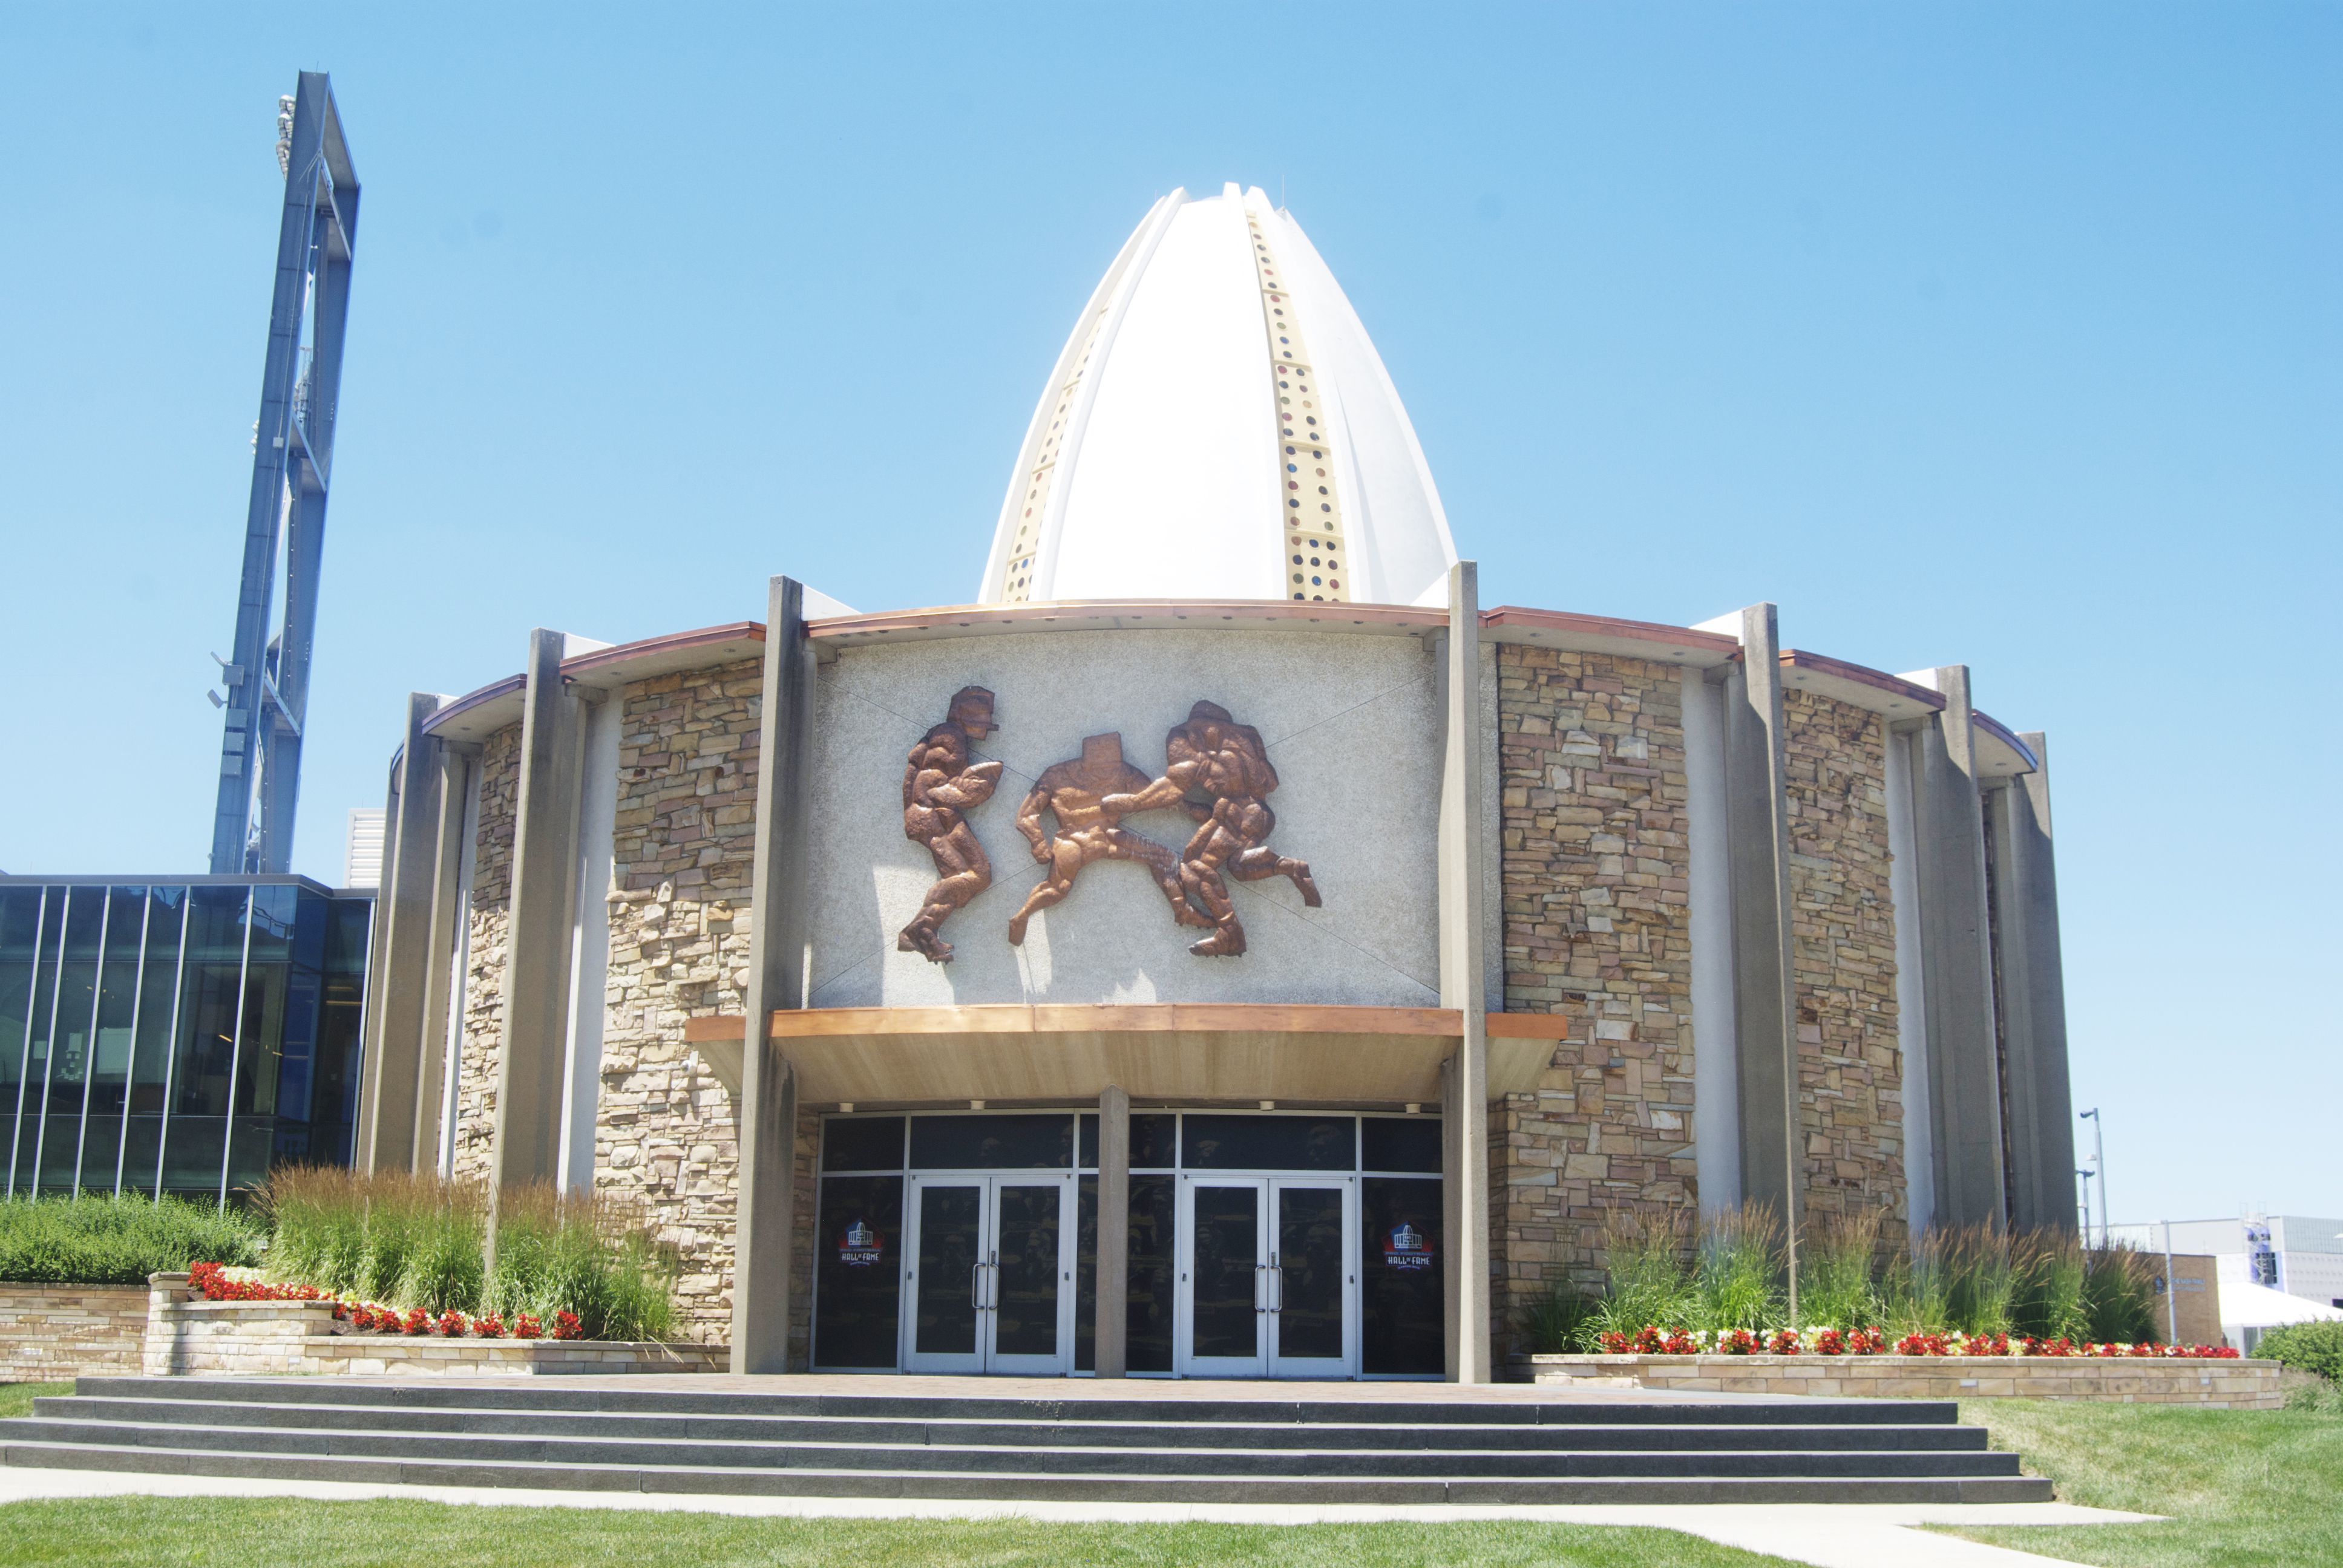 pro football hall of fame building